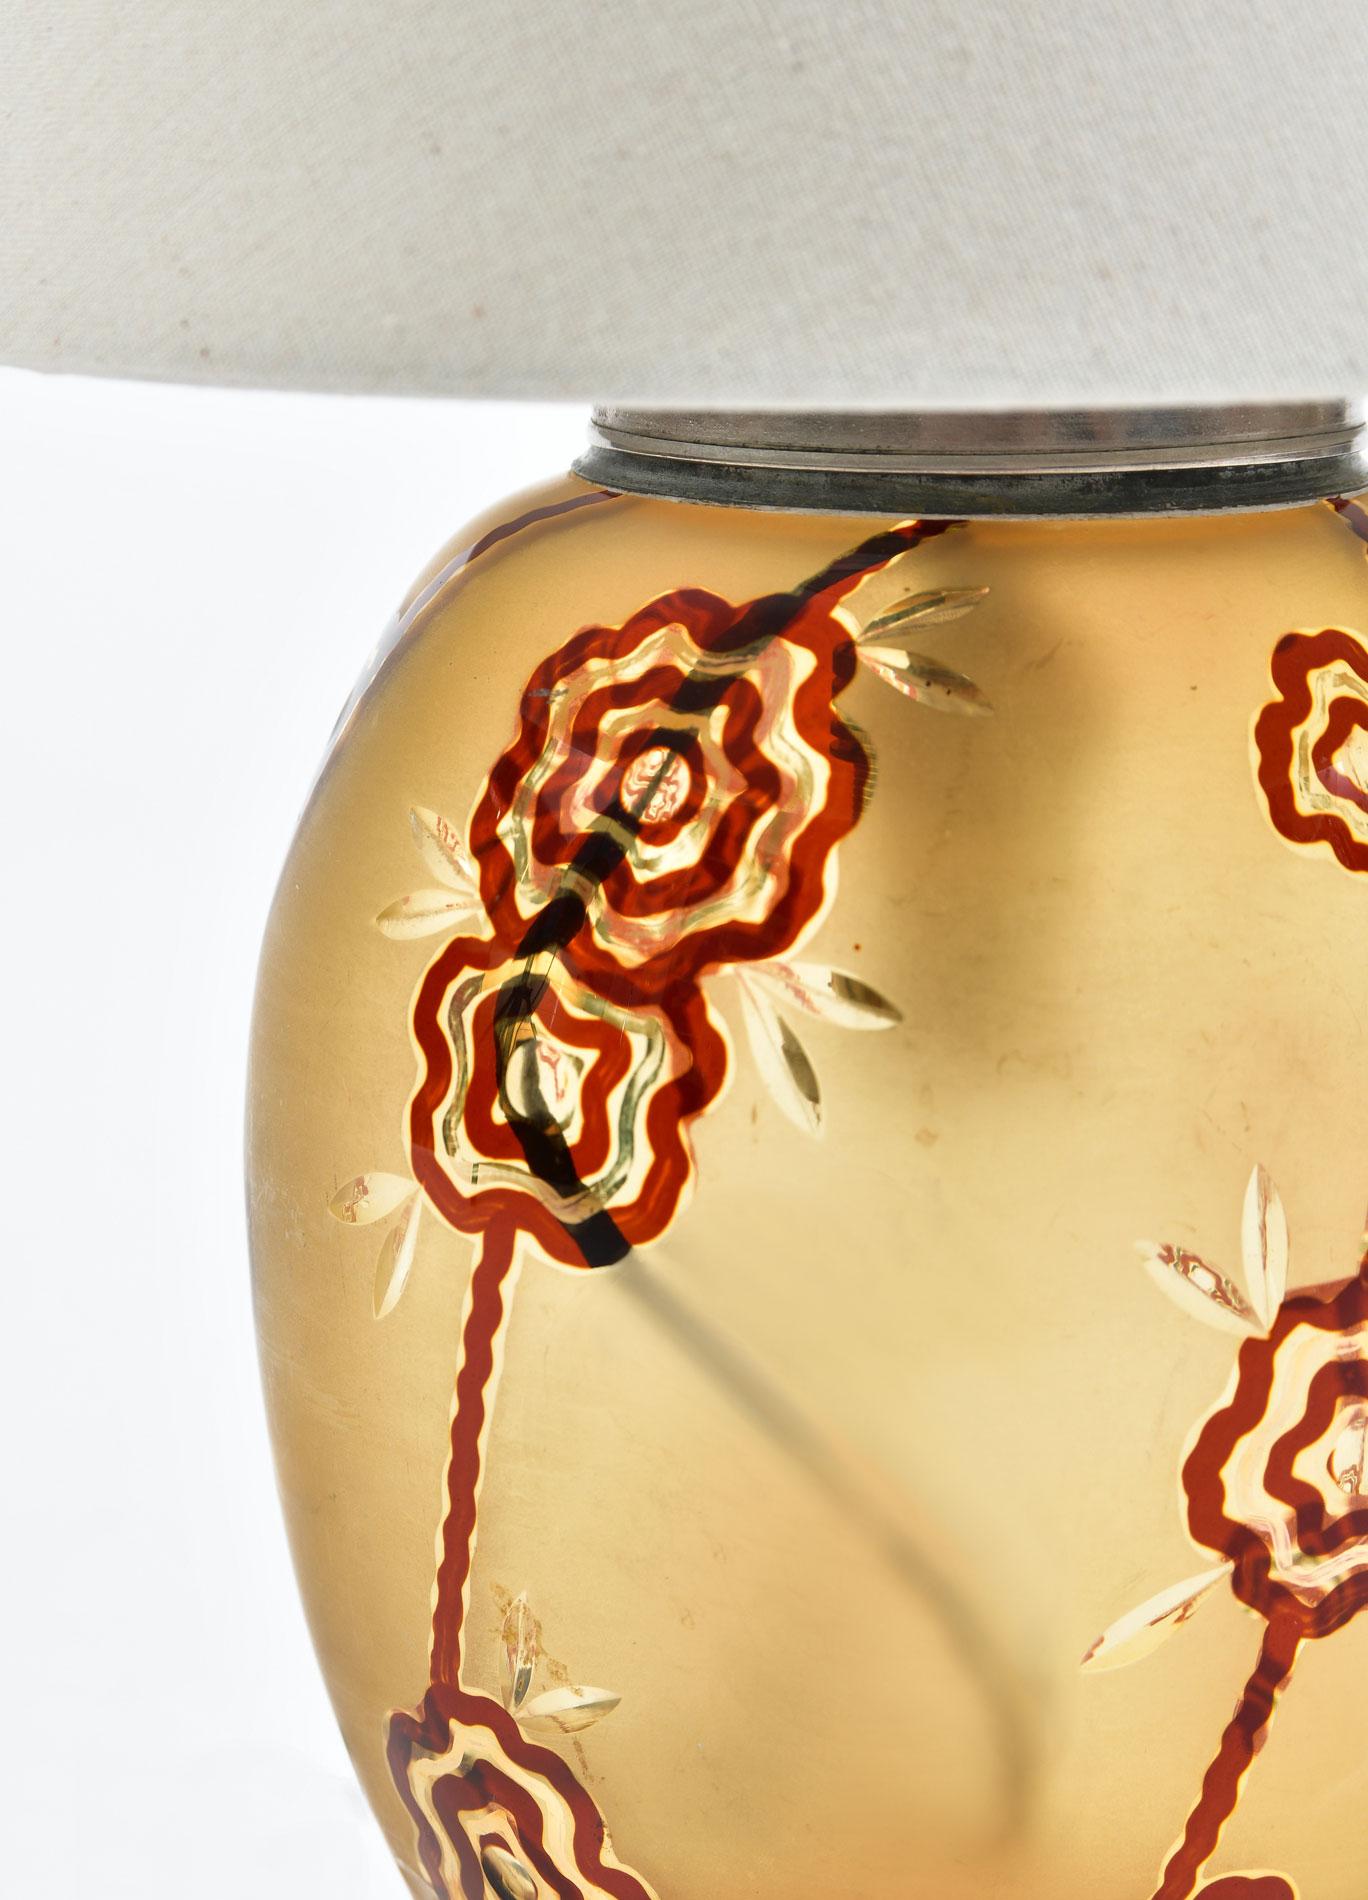 Rich amber glass base with red flower and etched leaves detail. A bulb inside the glass base throws a soft moody light.